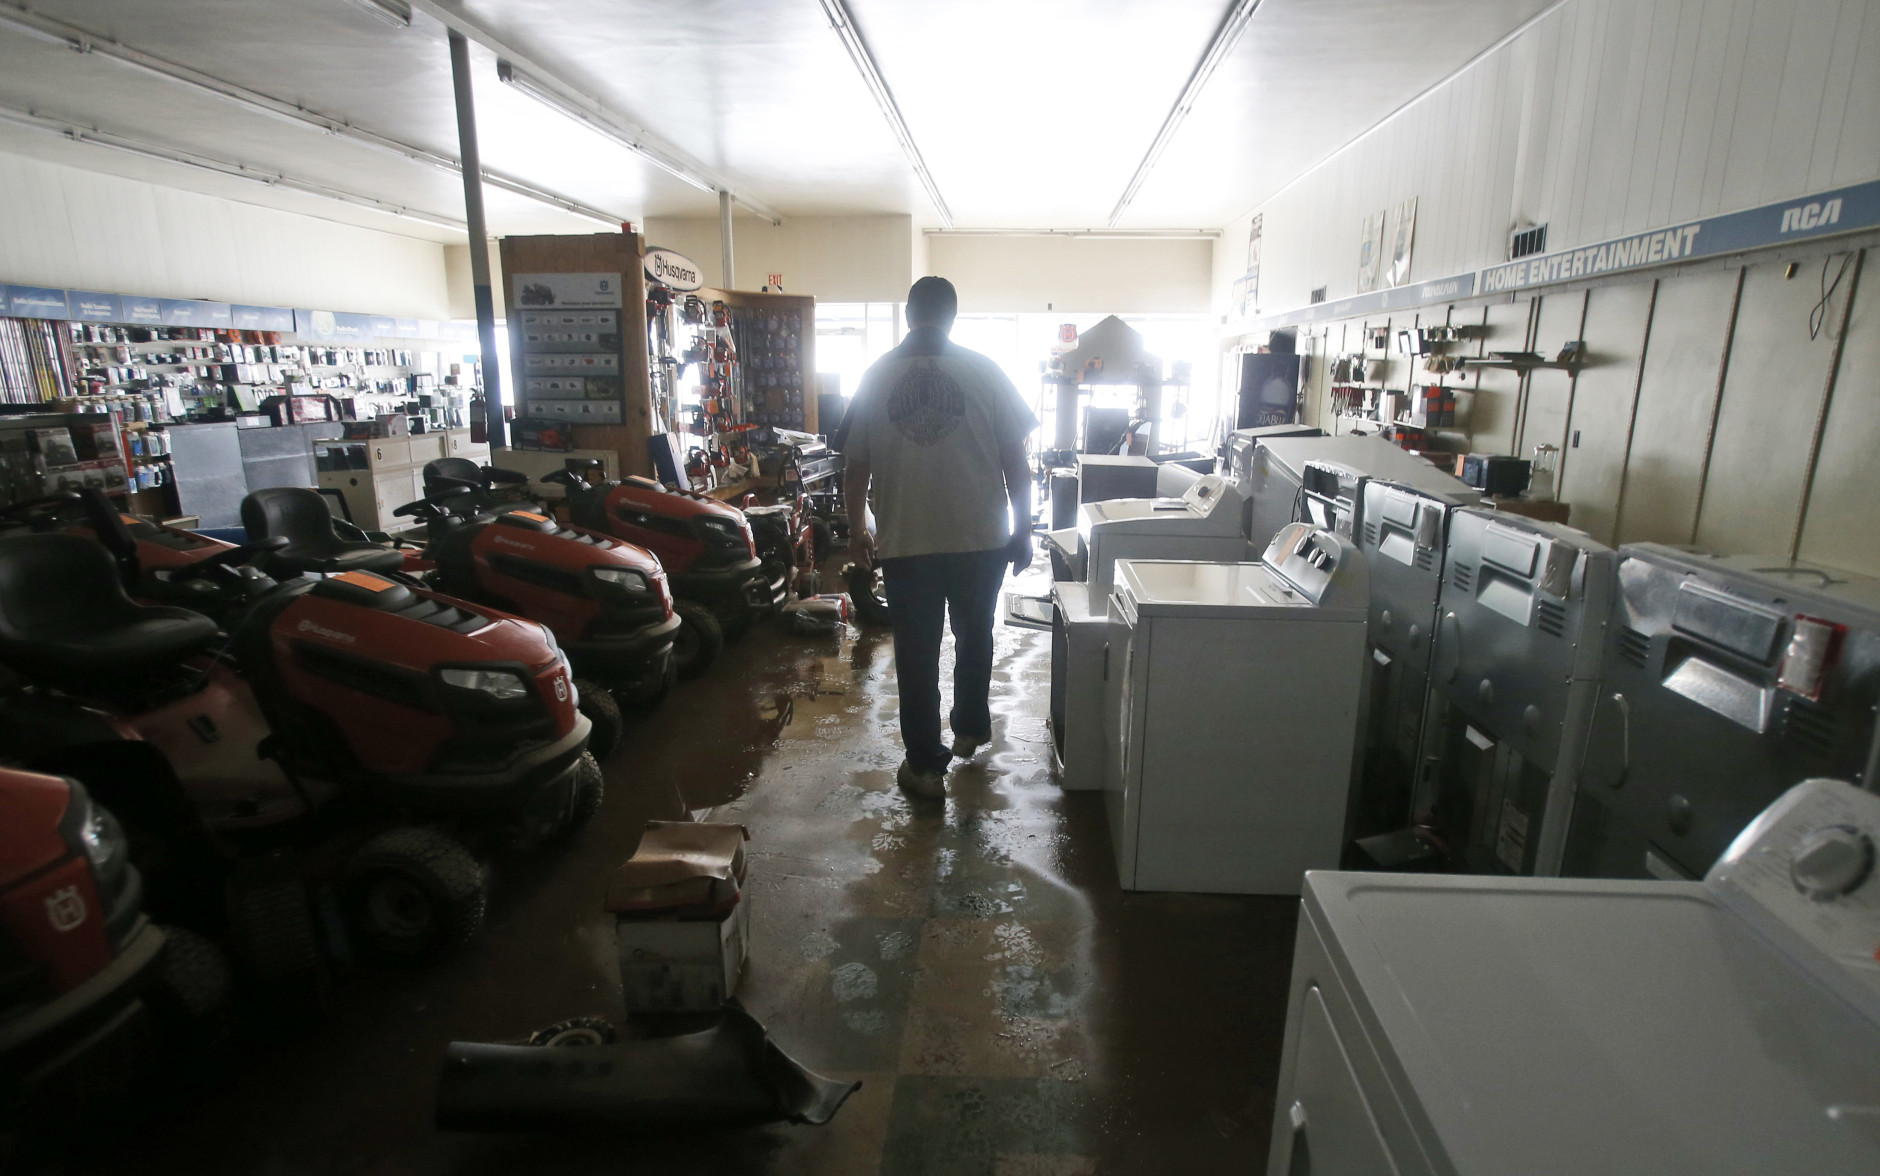 Paul Raines walks through his flooded Western Auto store in Rainelle, W. Va., Saturday, June 25, 2016. Heavy rains that pummeled West Virginia left multiple people dead, and authorities said Saturday that an unknown number of people in the hardest-hit county remained unaccounted for. (AP Photo/Steve Helber)